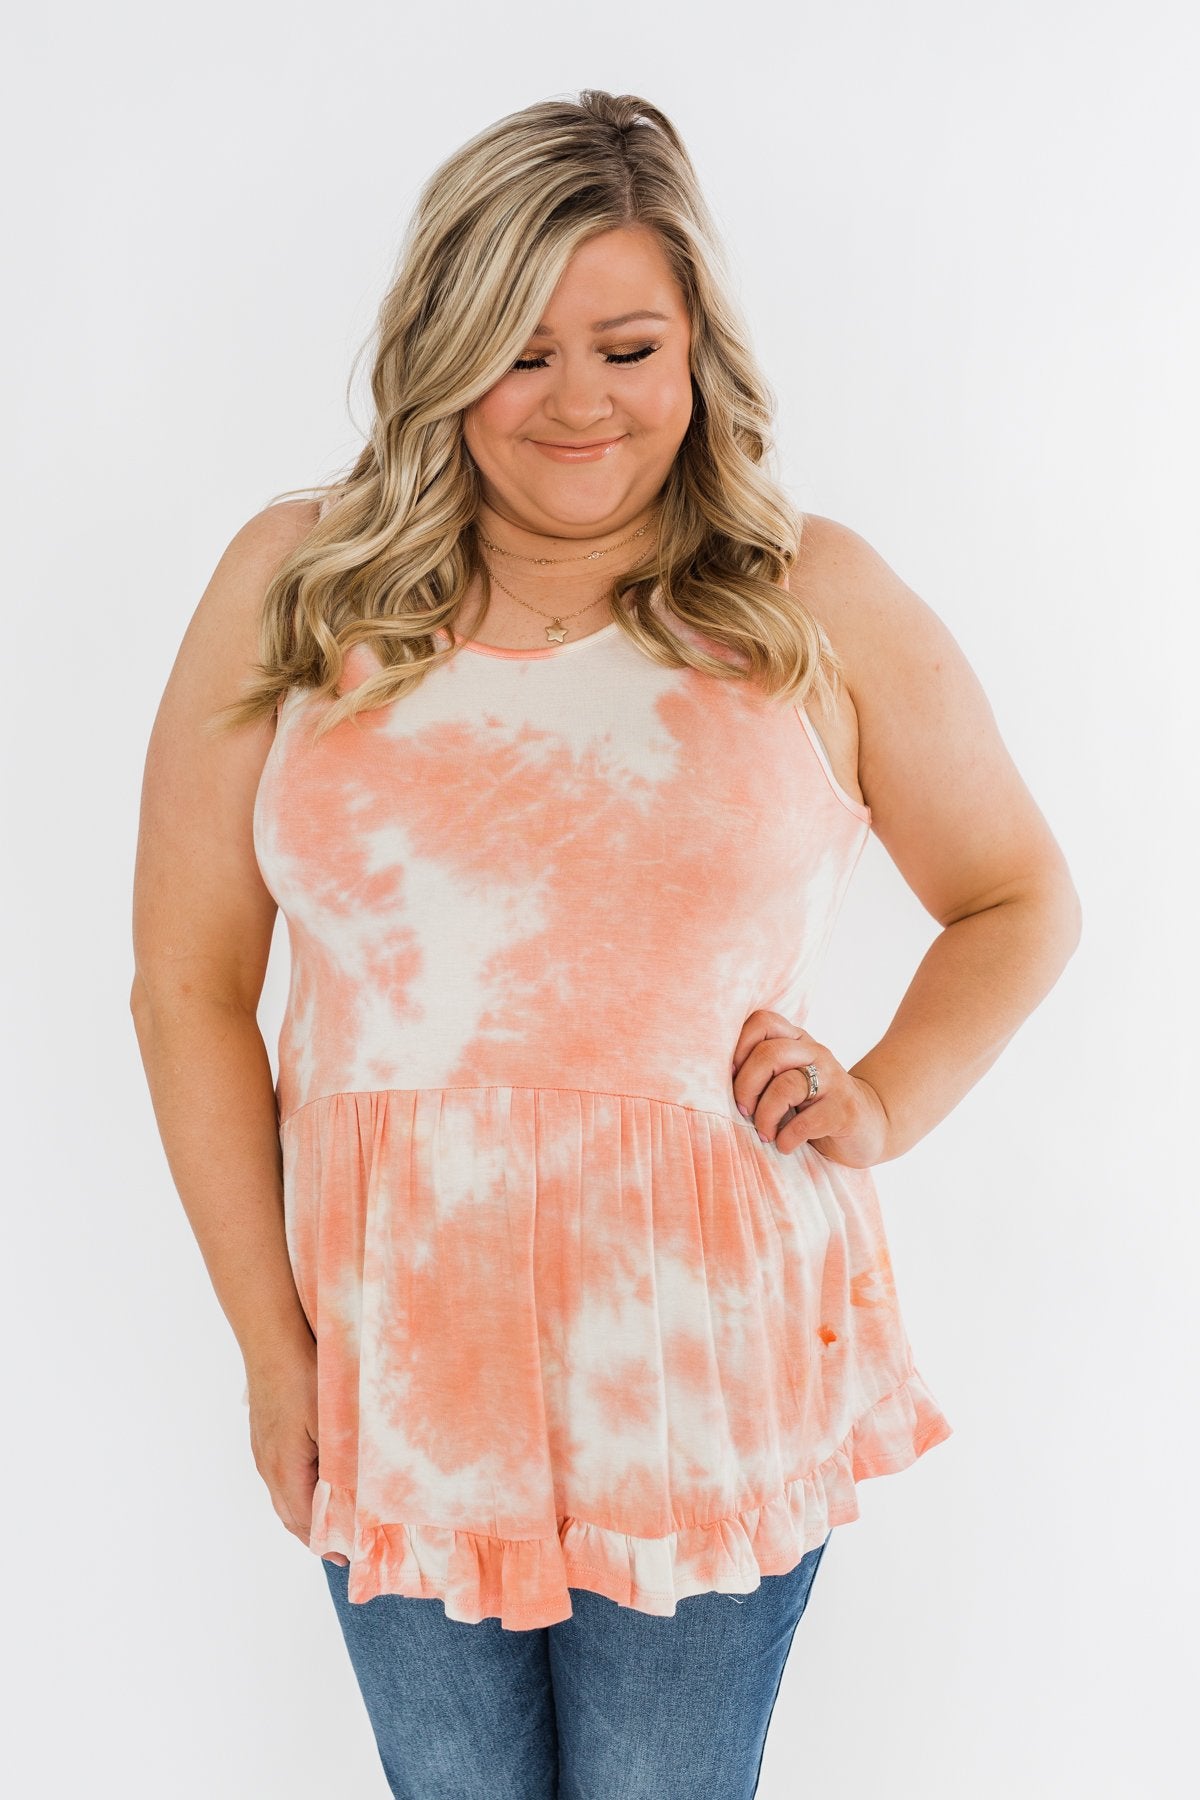 Highlight Of Your Life Babydoll Tank Top- Coral